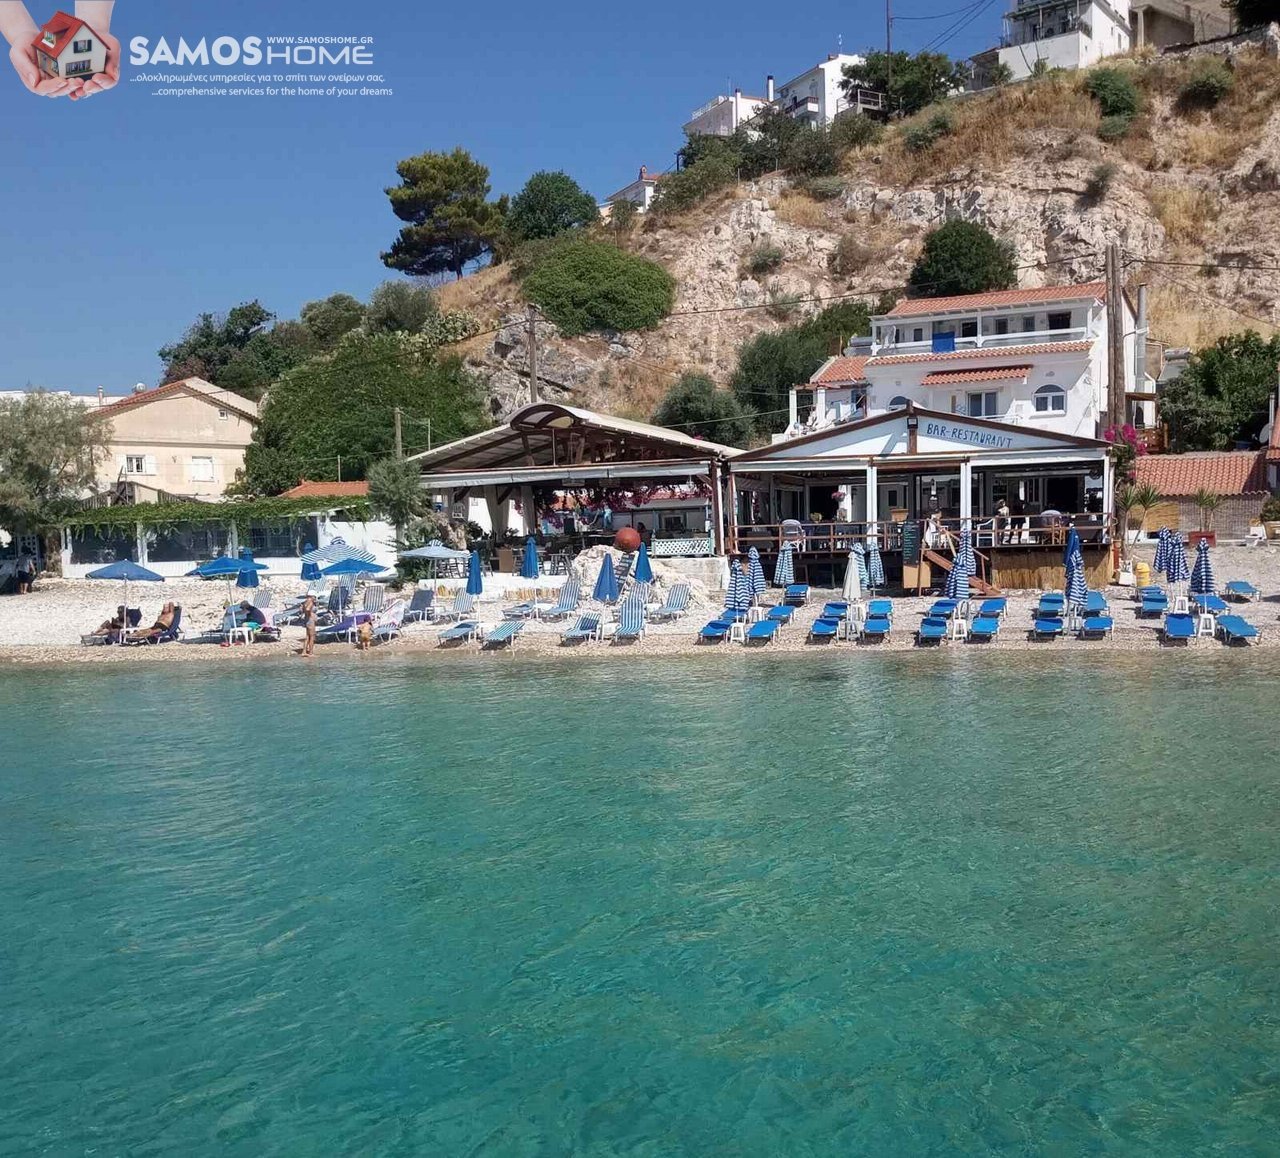 Store For sale - Samos